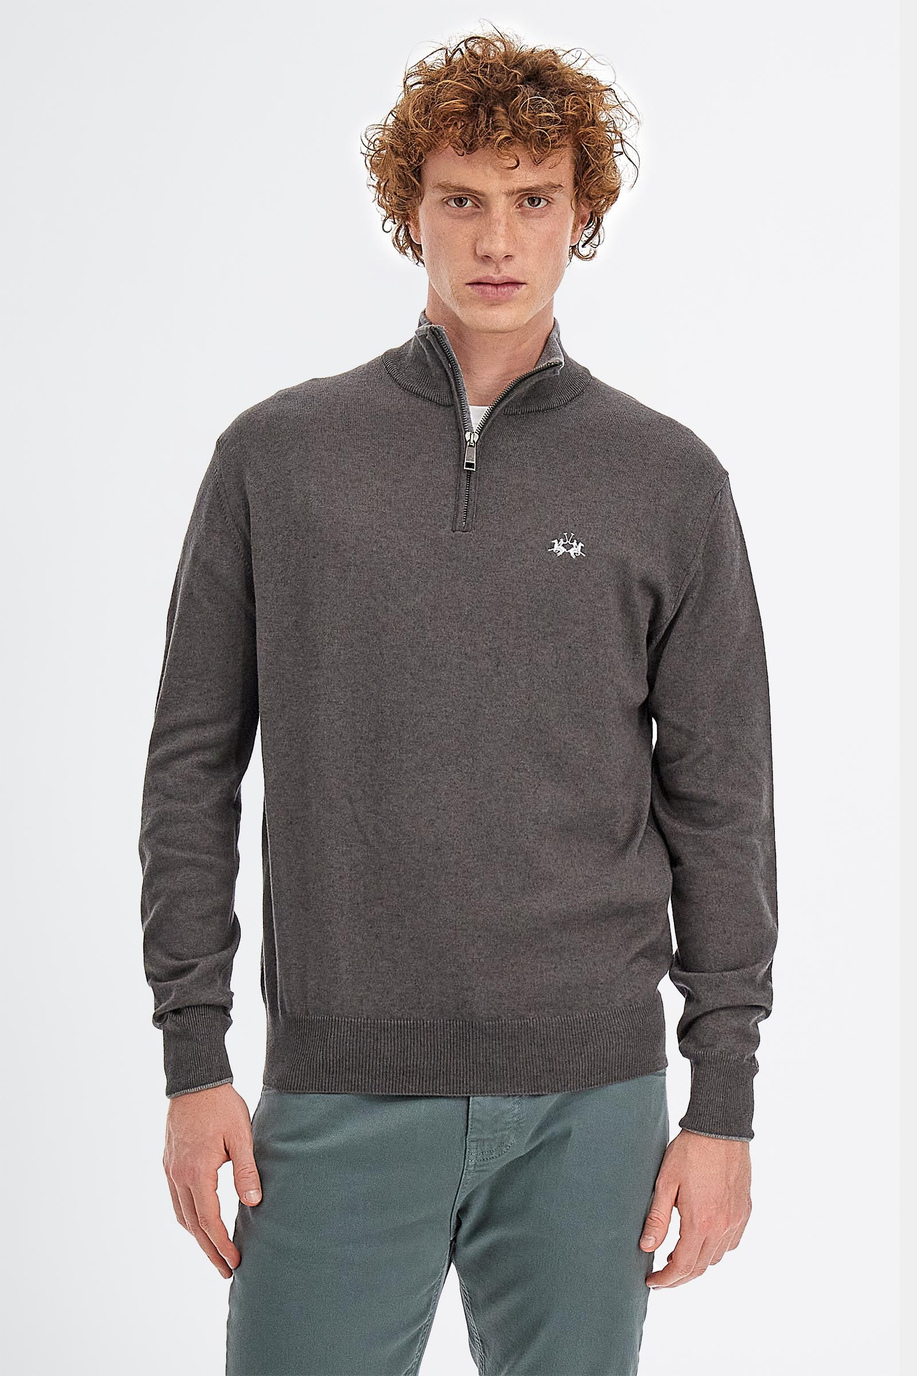 Men’s knitted sweater with long sleeves in cotton and regular fit wool blend with zip neckline - Gifts under €150 for him | La Martina - Official Online Shop